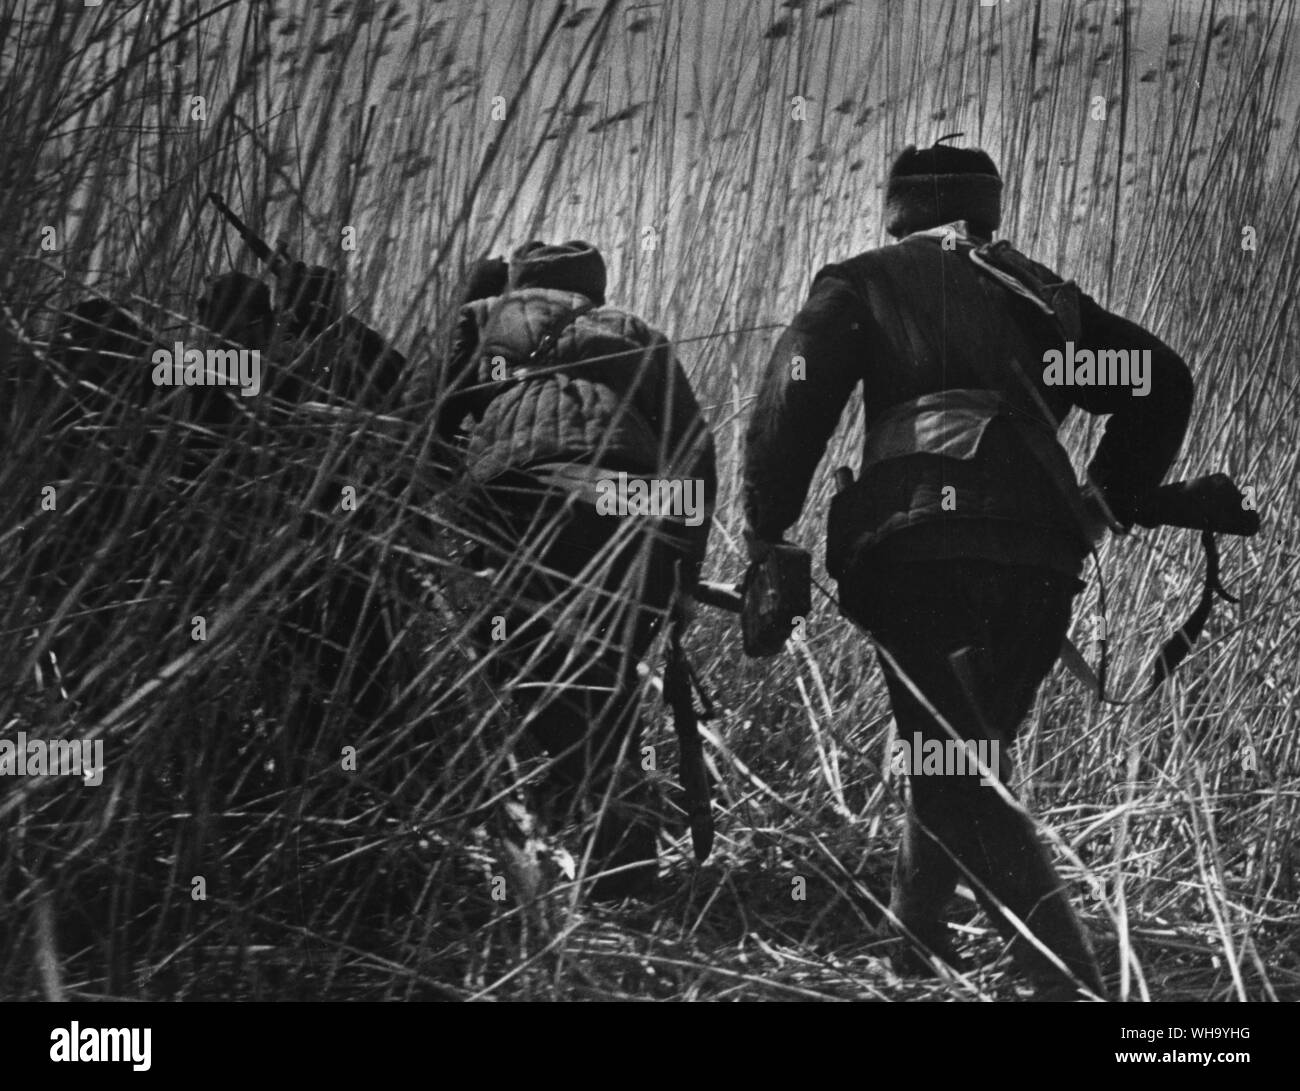 WW2: Russia/ Byelorussia partisans during the three years of a struggle when every hour could be their last. Stock Photo